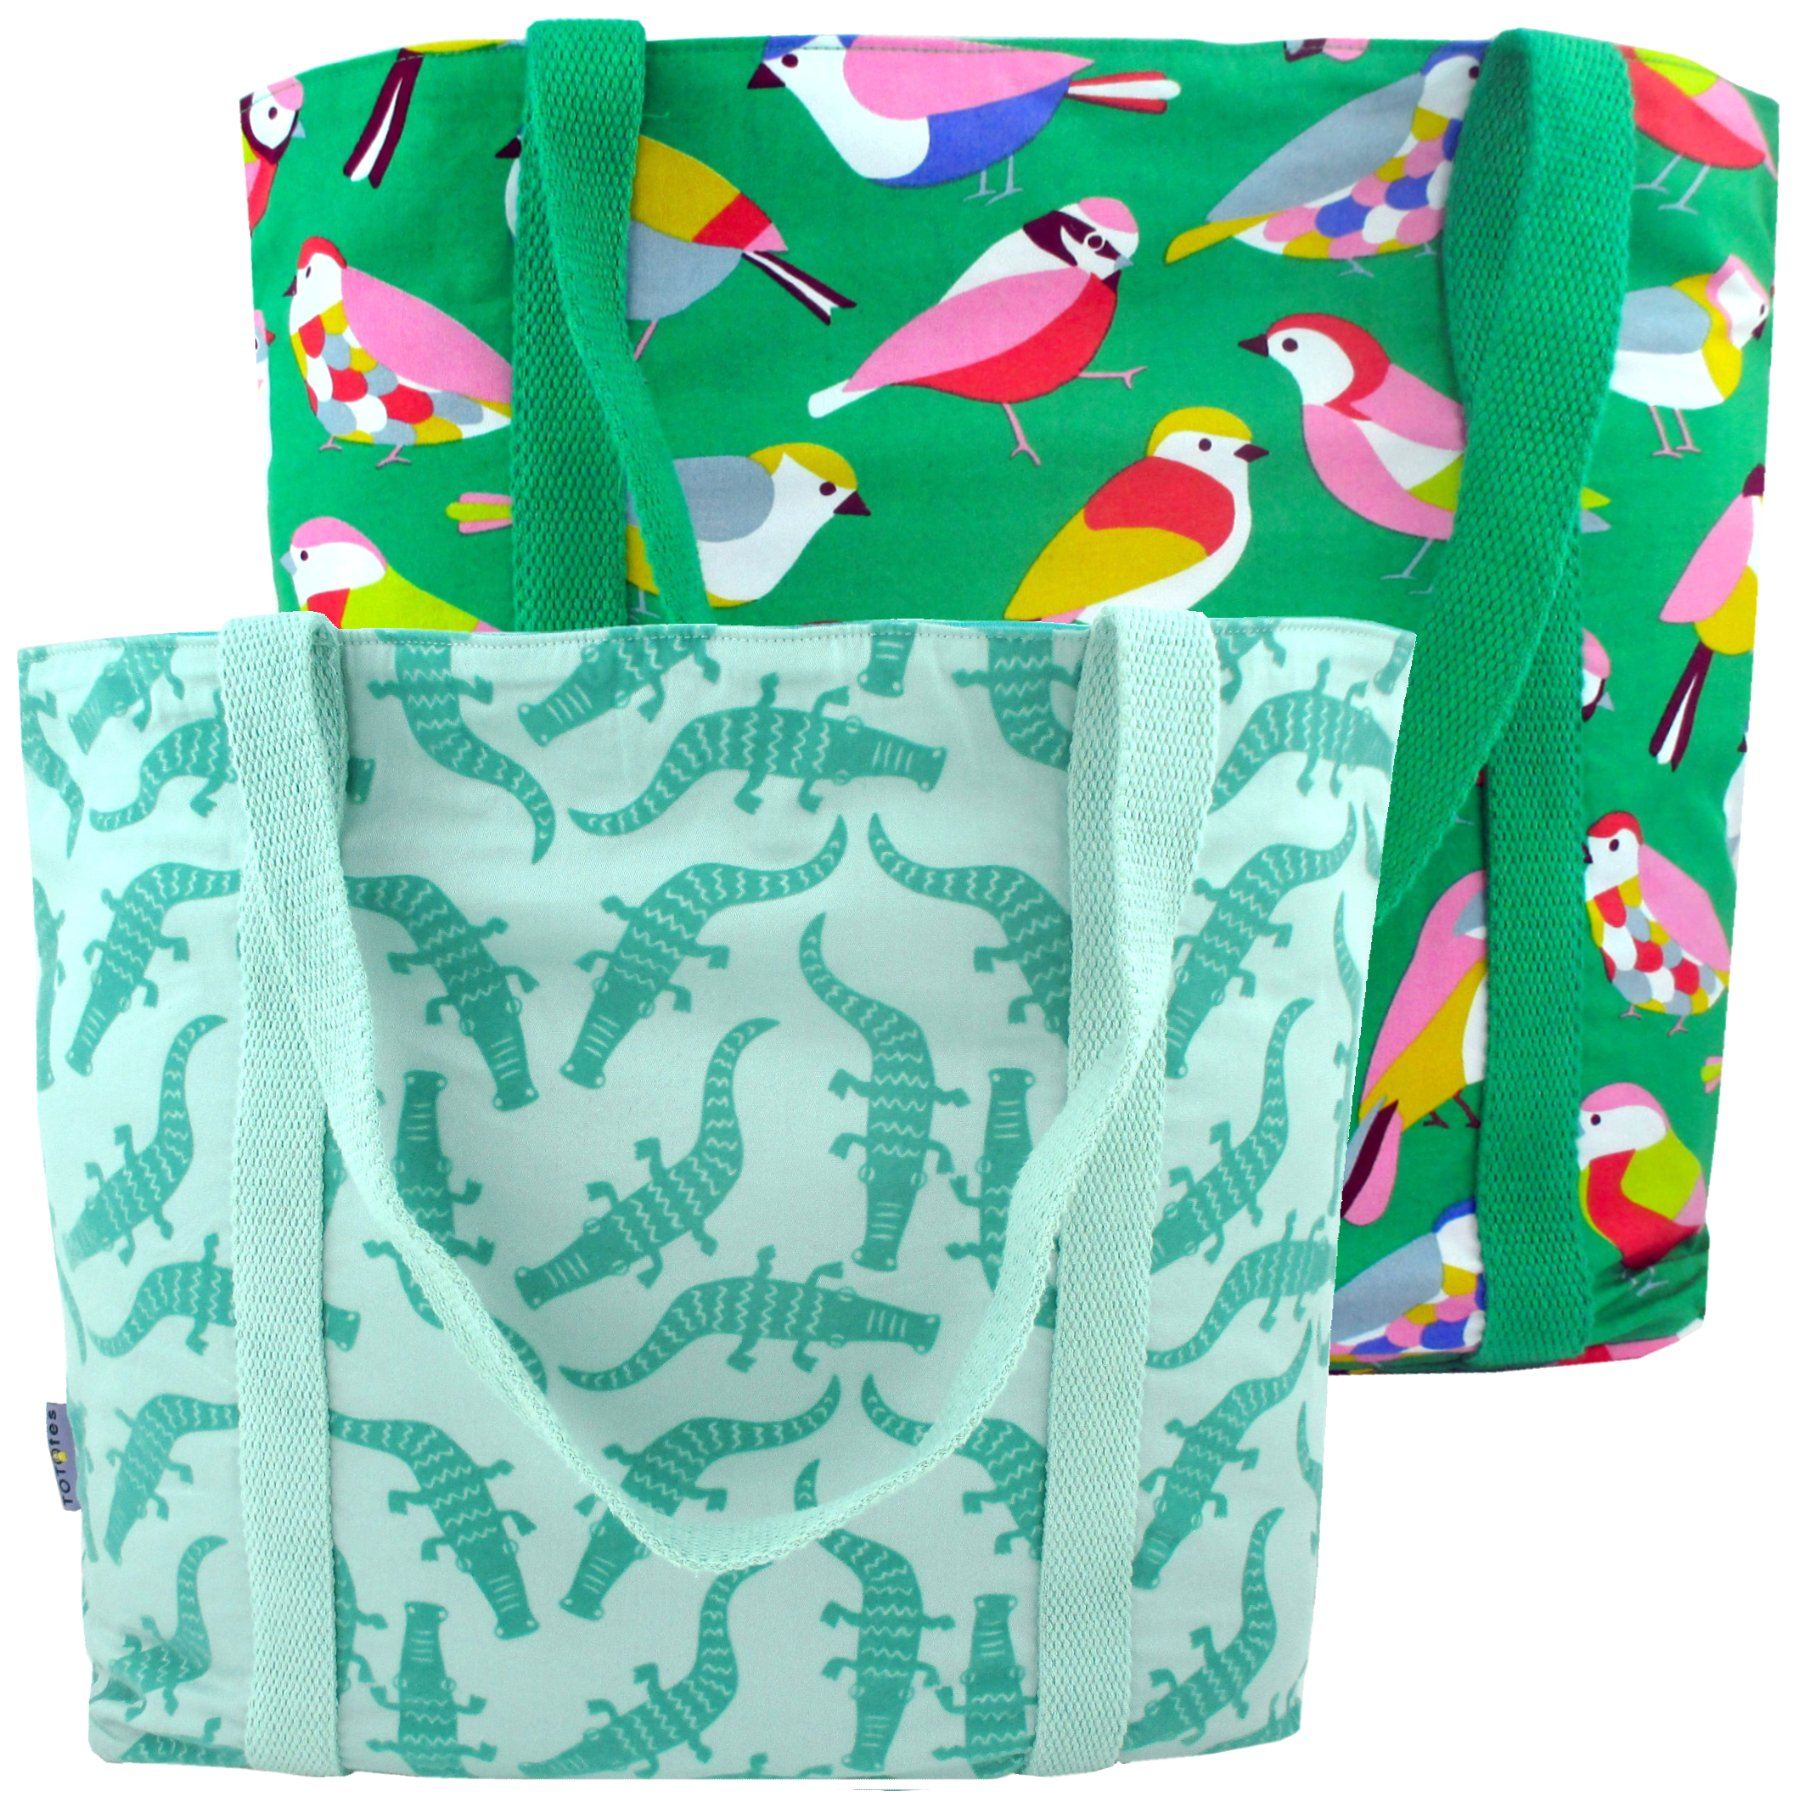 Bright Green Large Shopper Totes with Cute Animal Crocodile Bird Print | Pack of 2